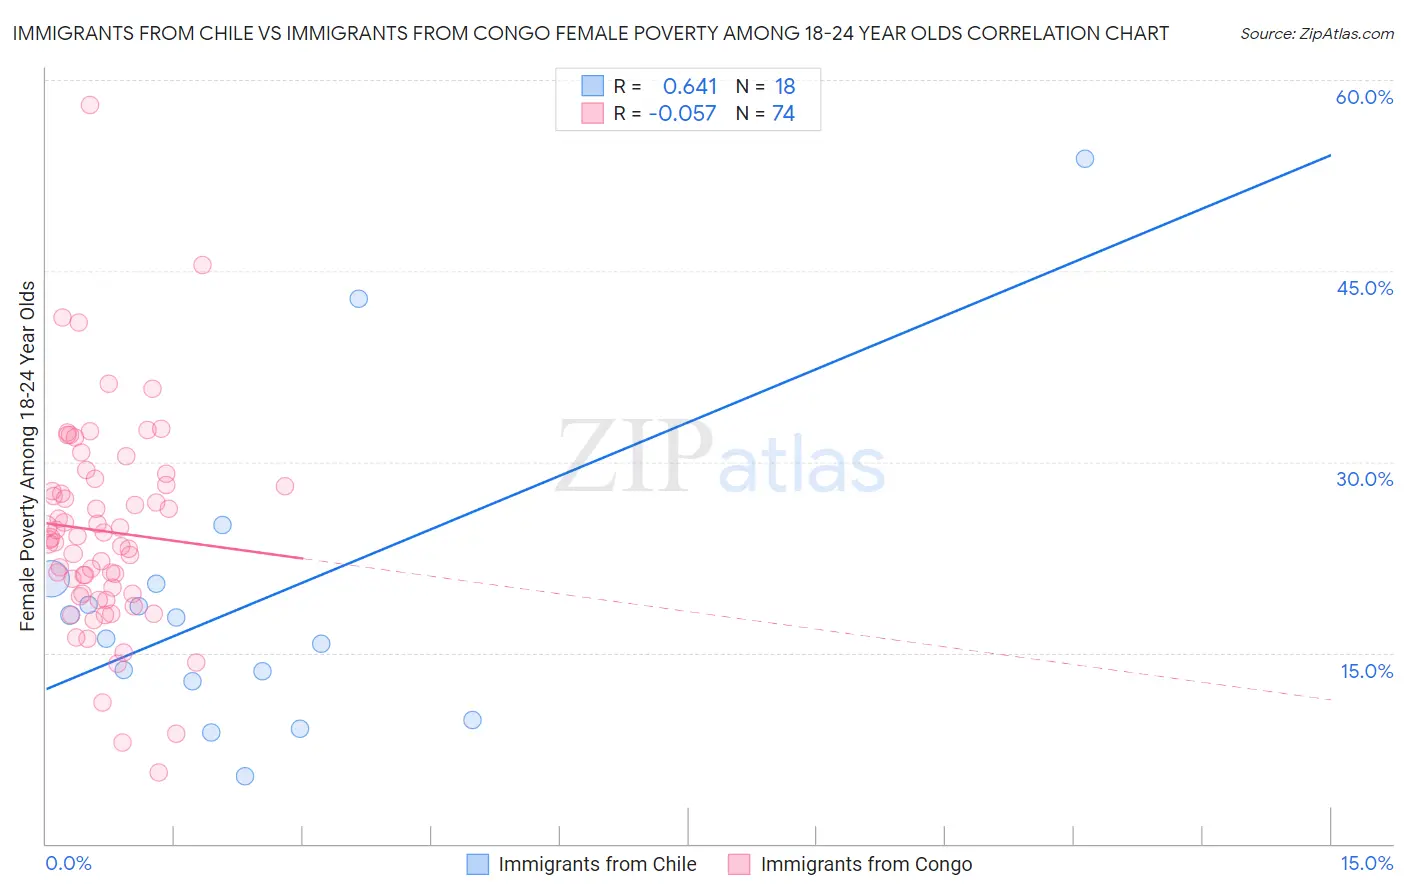 Immigrants from Chile vs Immigrants from Congo Female Poverty Among 18-24 Year Olds